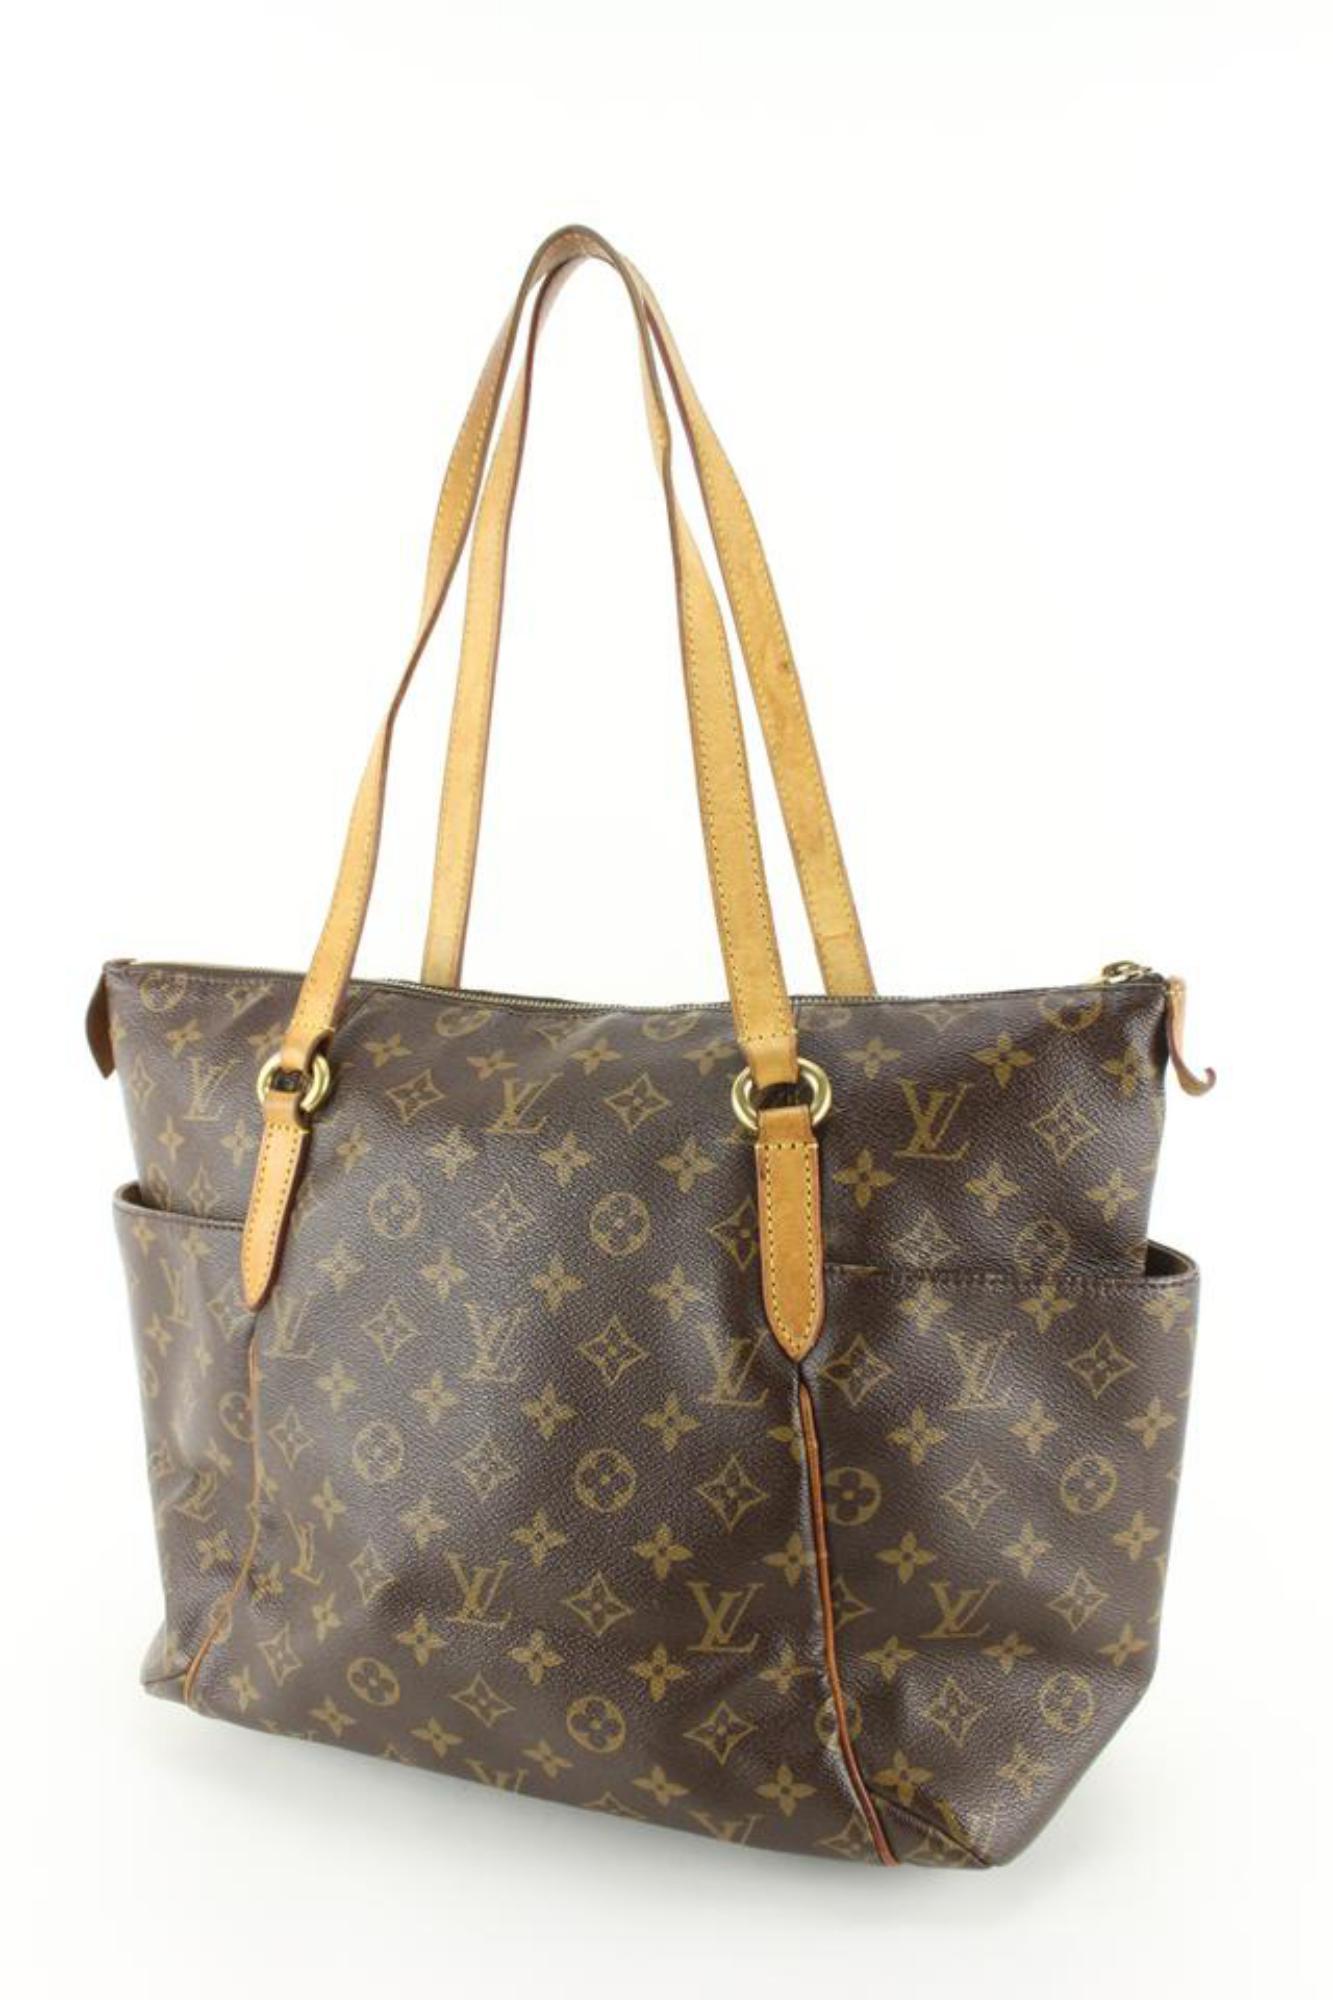 Louis Vuitton Monogram Totally PM Tote Bag 14lz720s For Sale 7